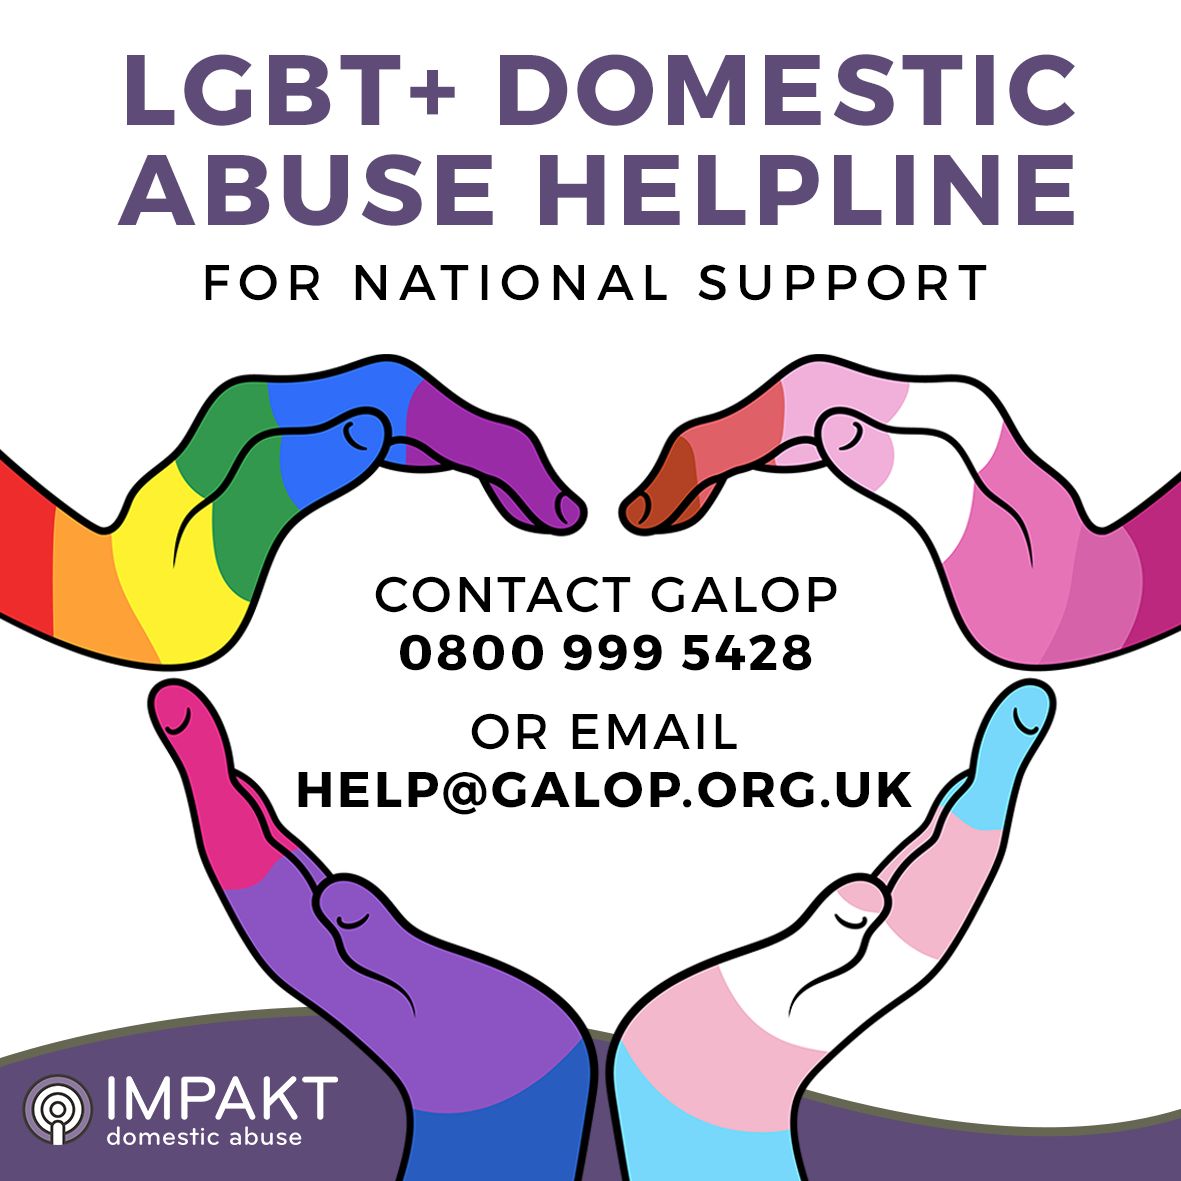 For national LGBT+ domestic abuse support contact @galopuk
You can call or email them on their helpline.
#lgbtsupport #galopuk #DomesticAbuseSupport